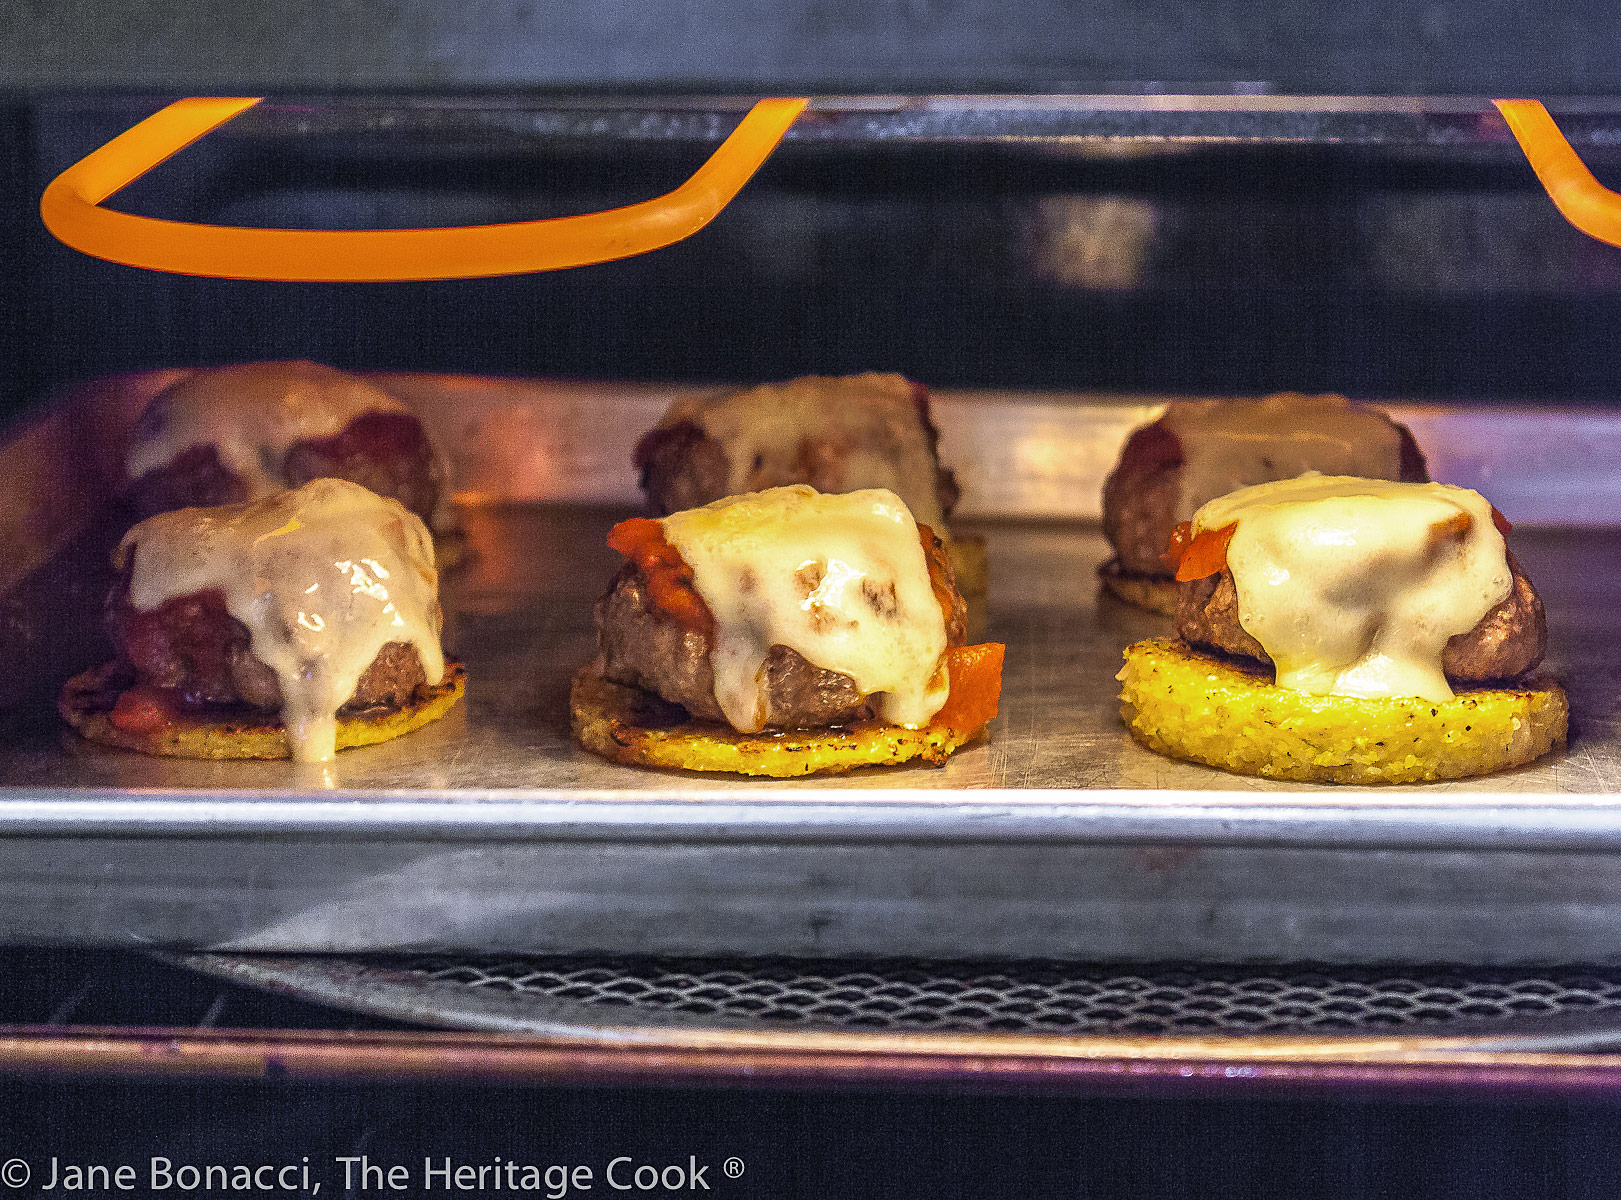 melting the cheese over the sliders under the broiler. 